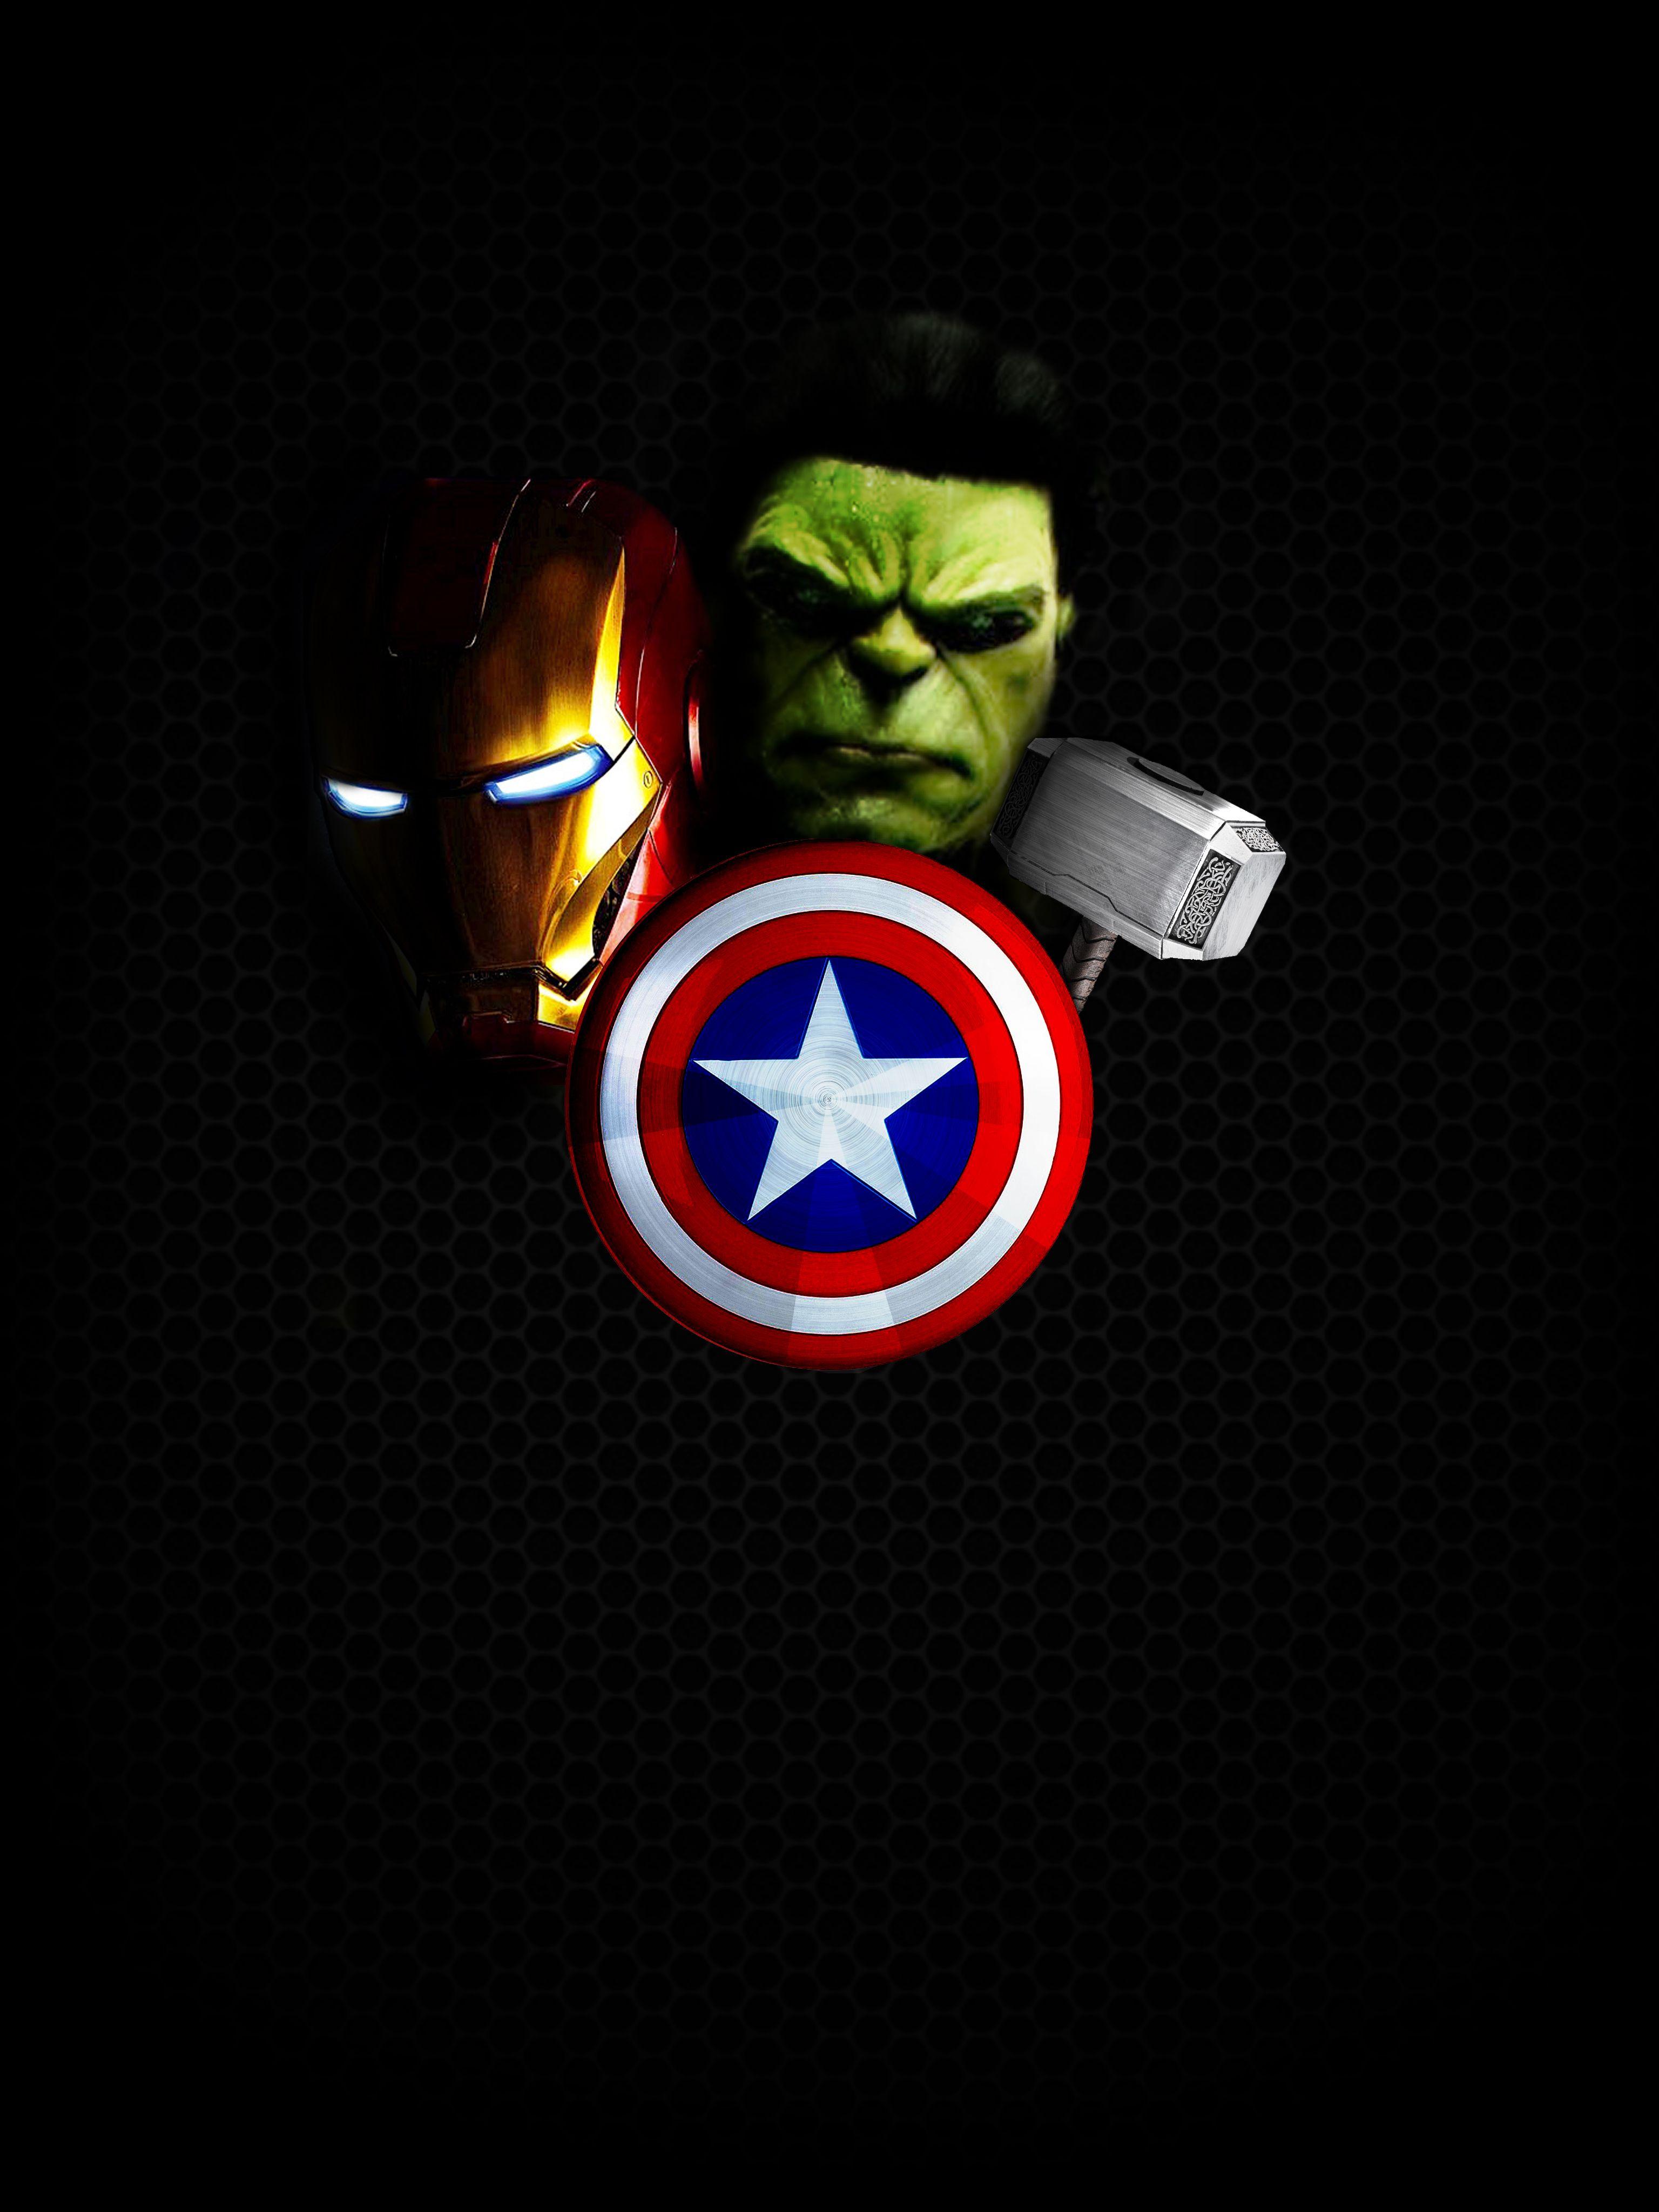 ☺iphone ios 7 wallpaper tumblr for ipad. Marvel and Comic